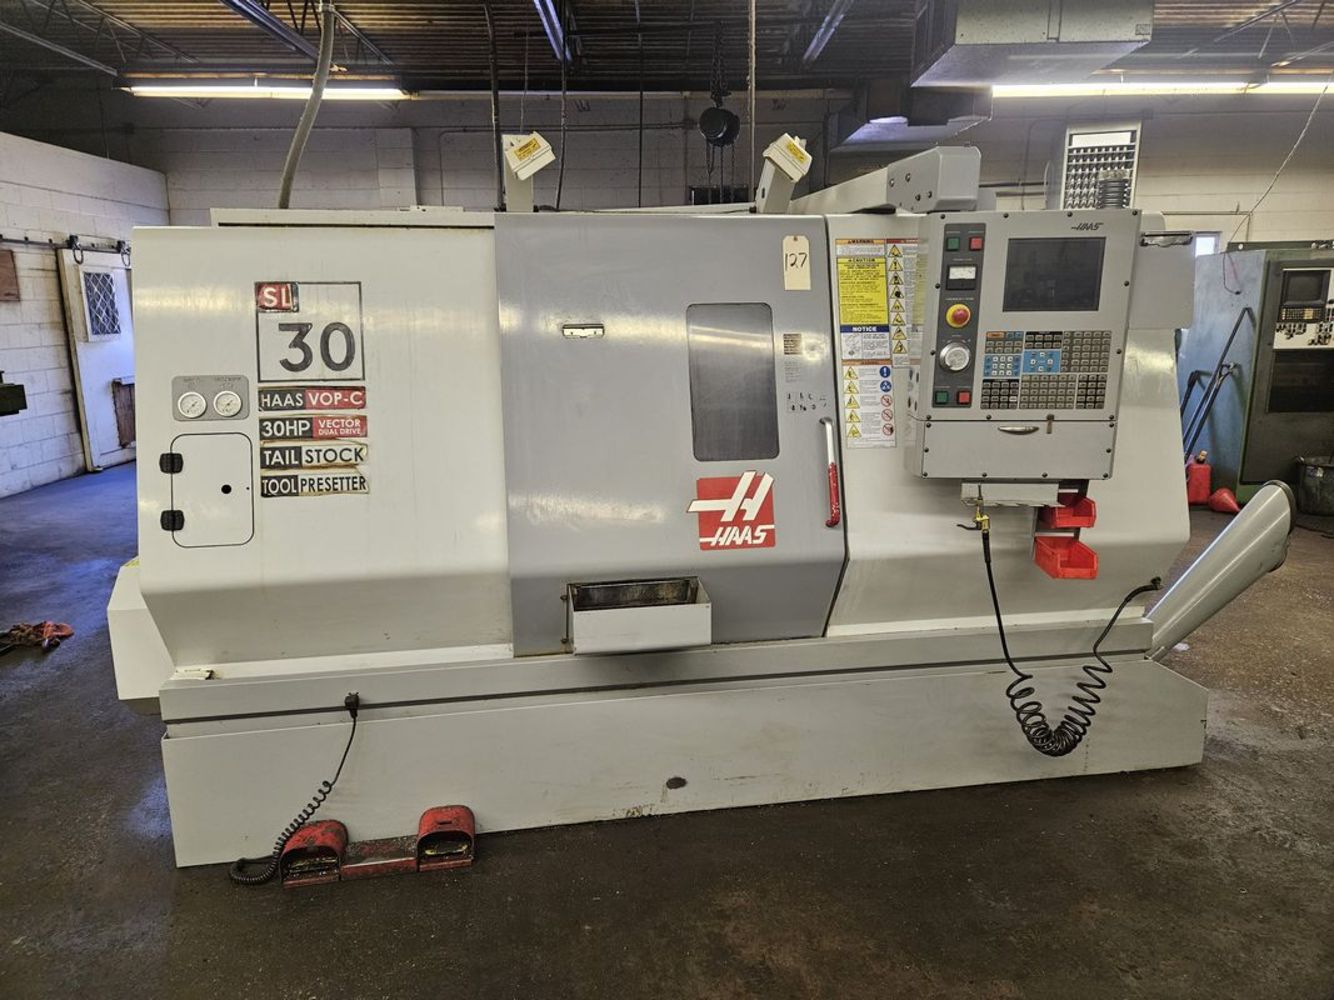 OWNERS RETIRING! COMPLETE LIQUIDATION OF HAAS CNC MACHINE SHOP!